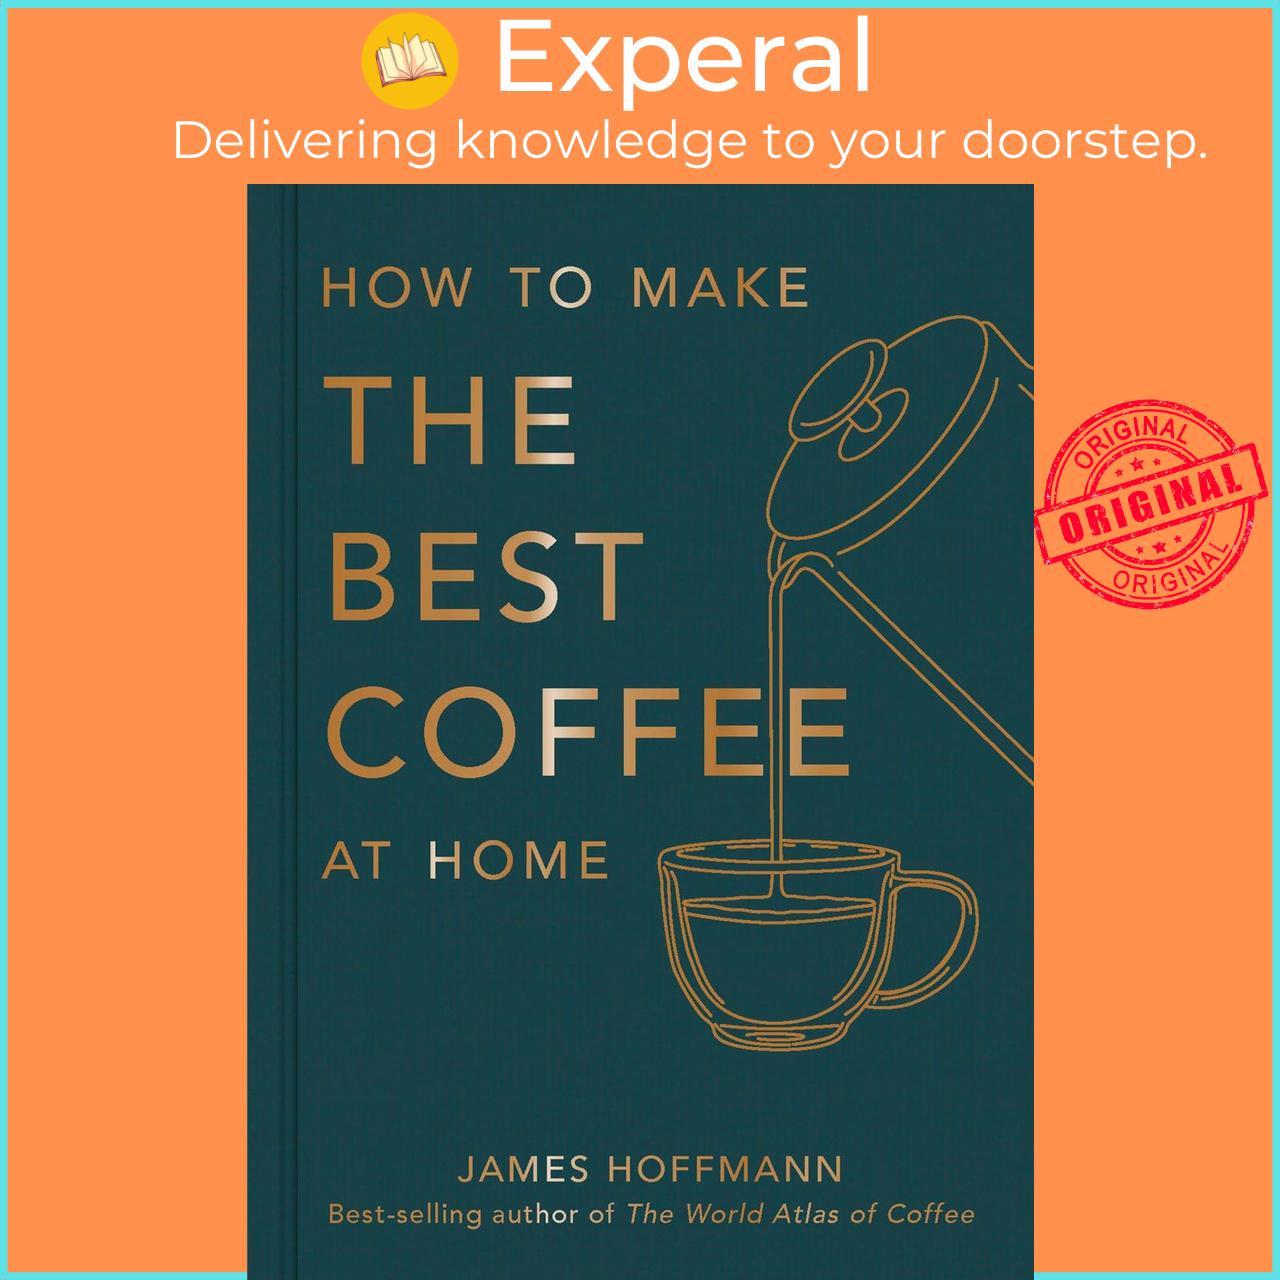 Sách - How to make the best coffee by James Hoffmann (UK edition, hardcover)